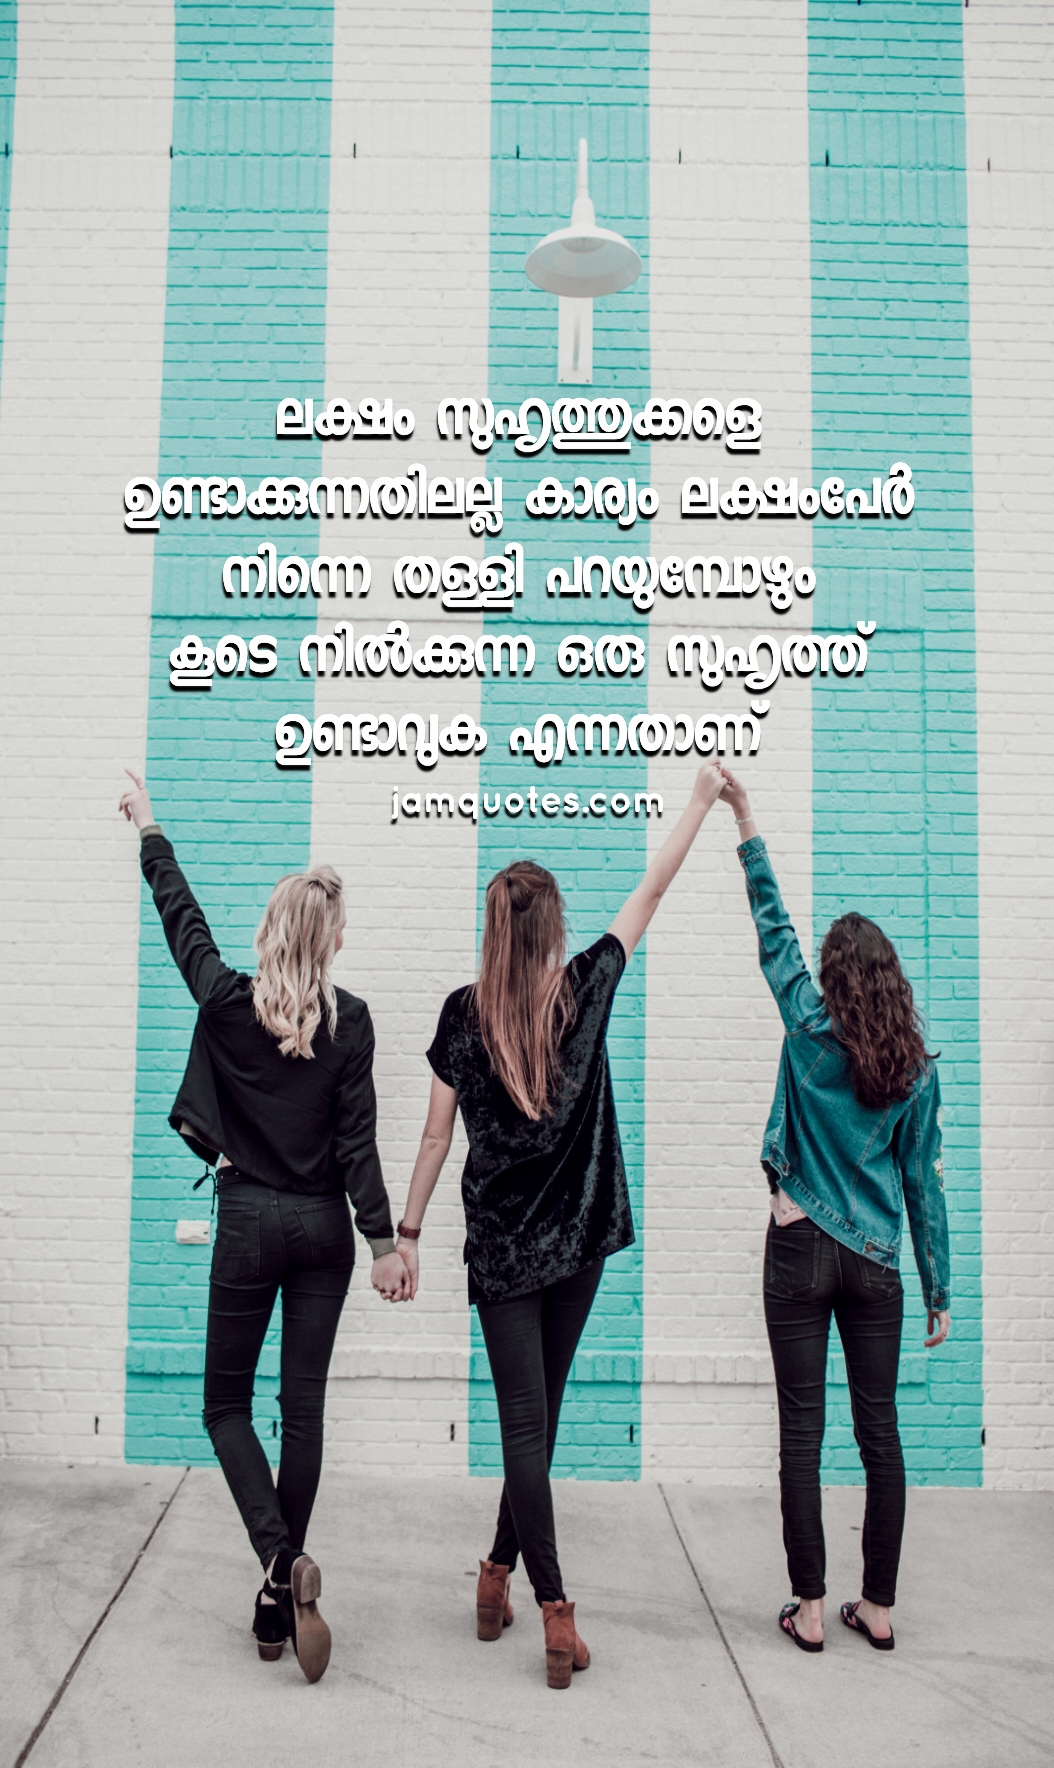 Malayalam quotes about friendship with images